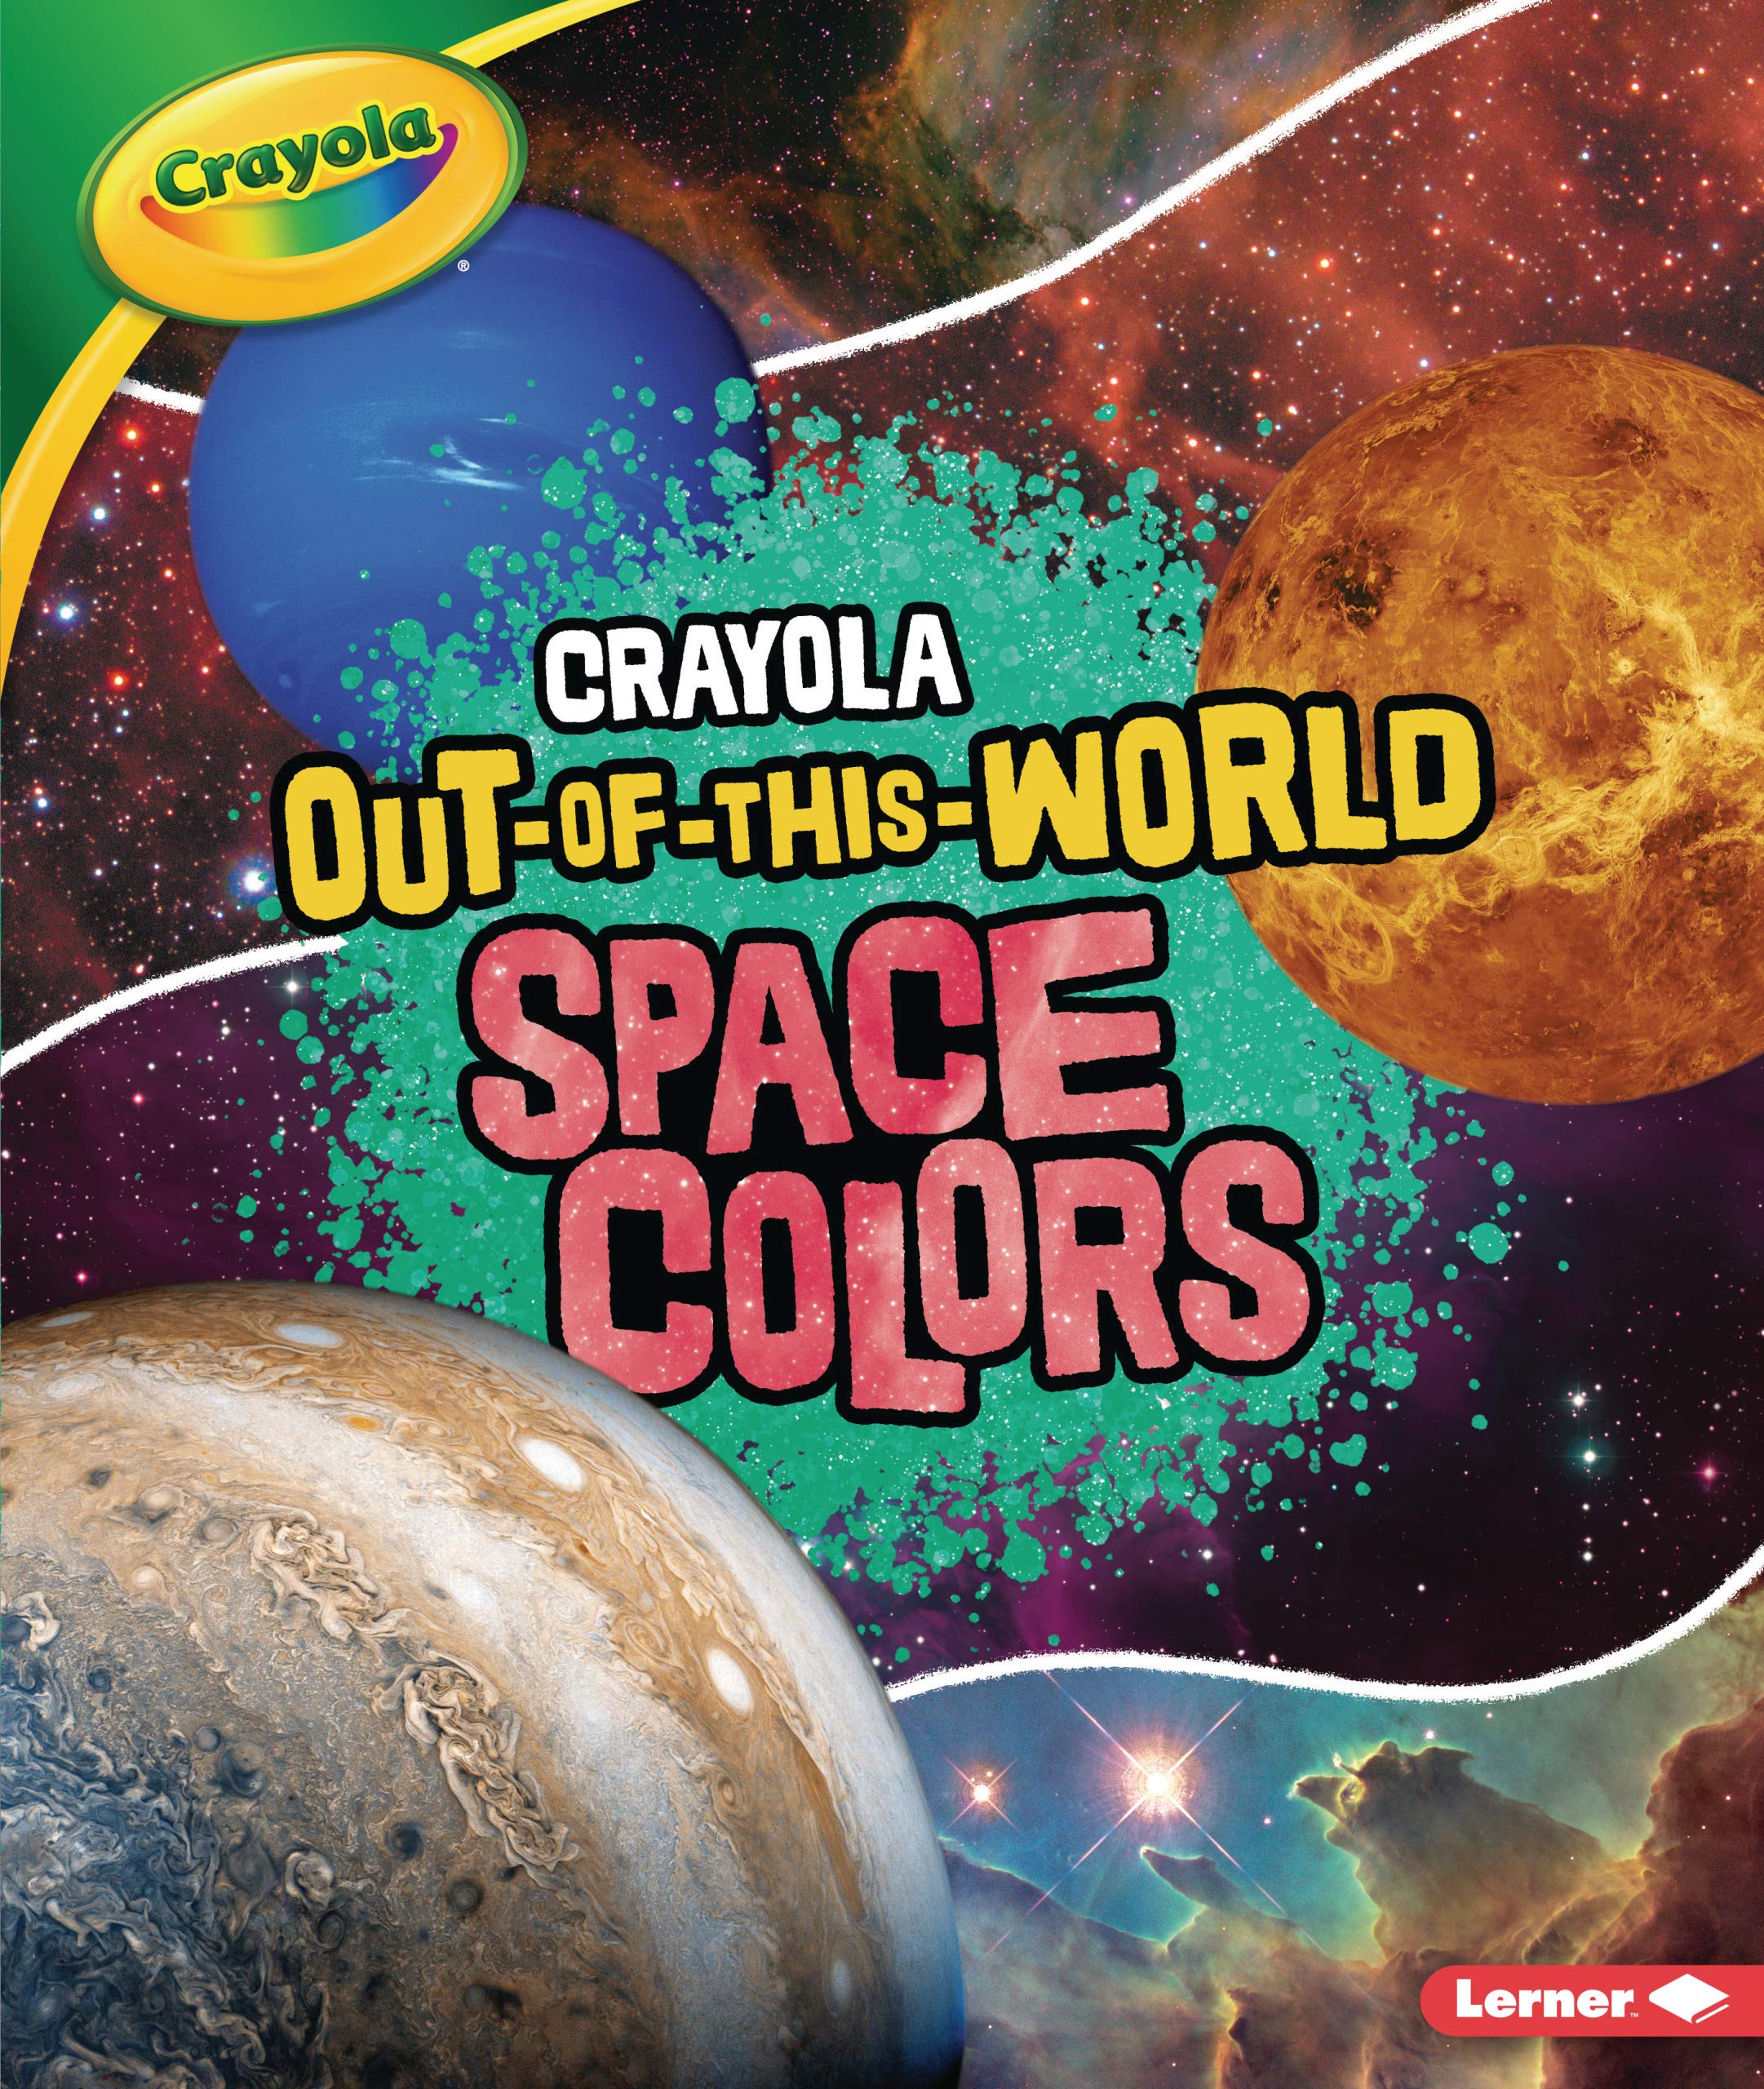 Crayola Out-of-This-World Space Colors